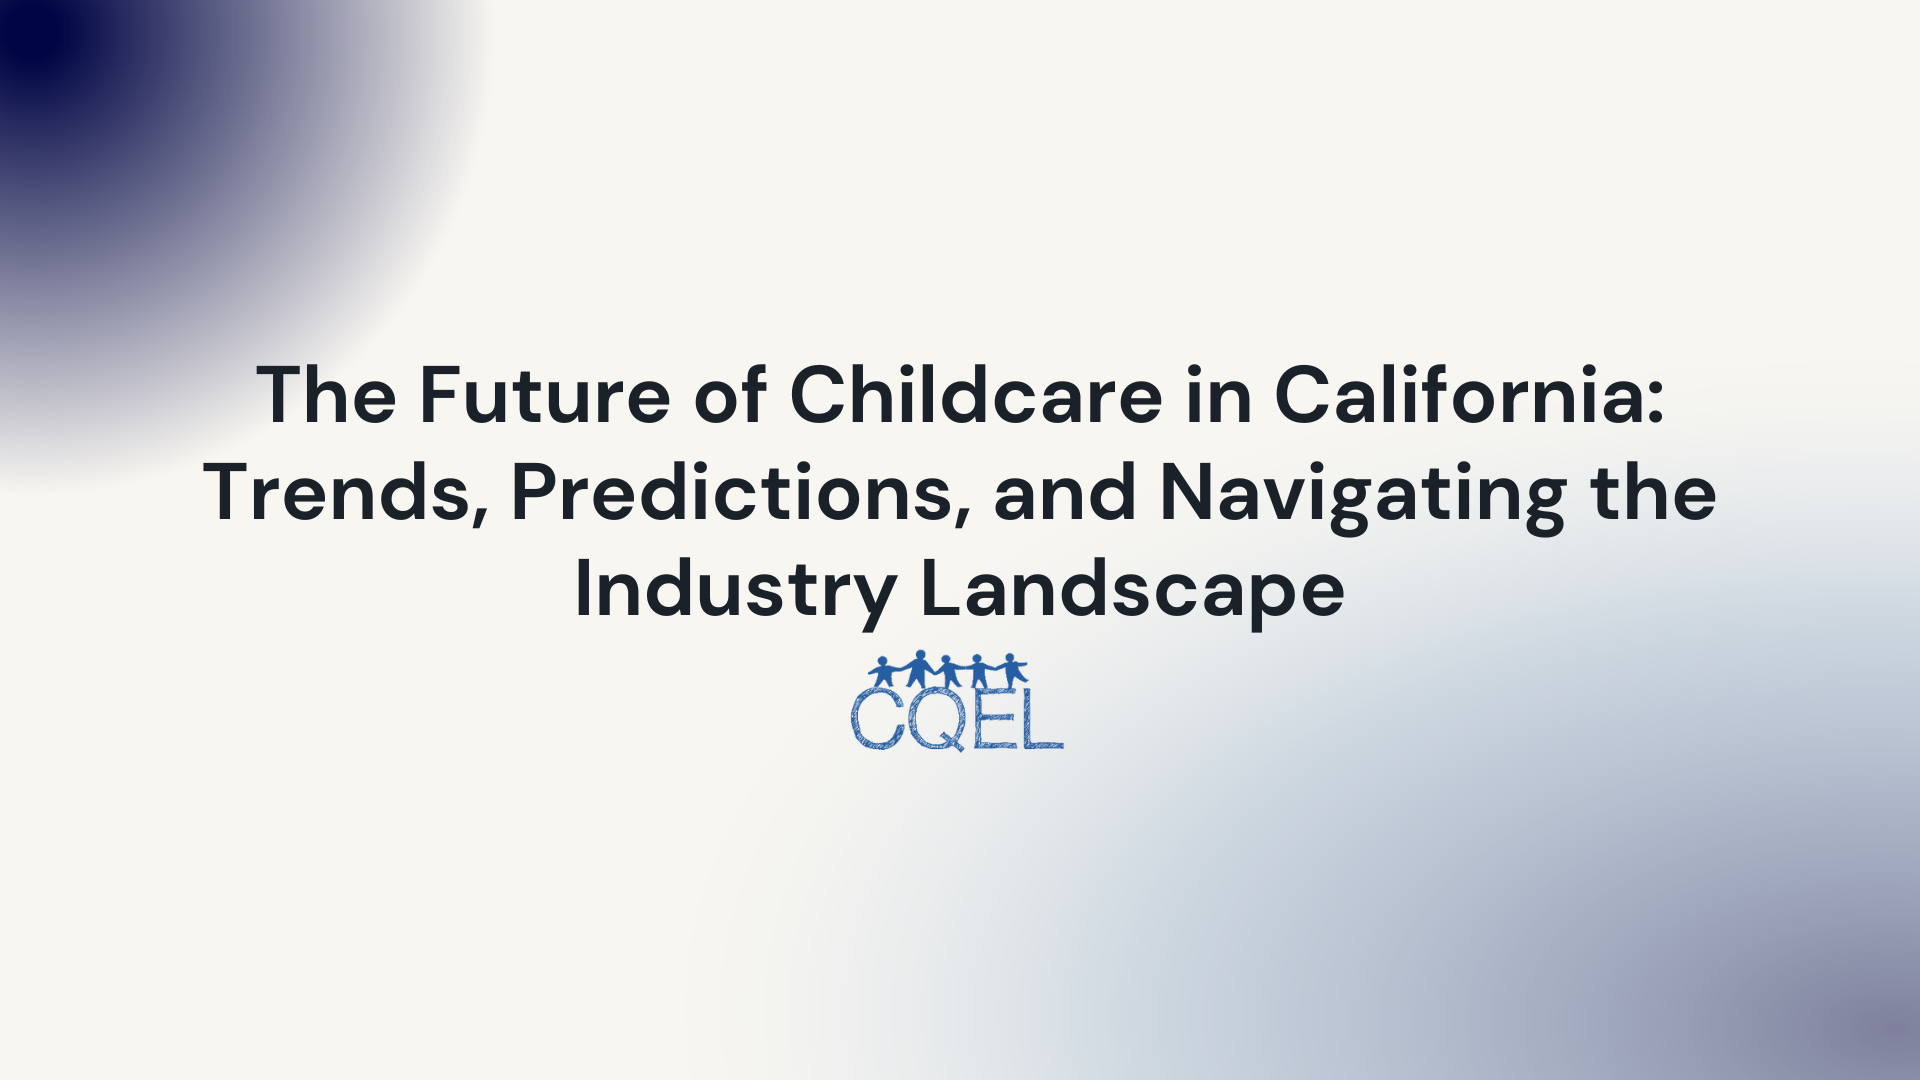 The Future of Childcare in California: Trends, Predictions, and Navigating the Industry Landscape